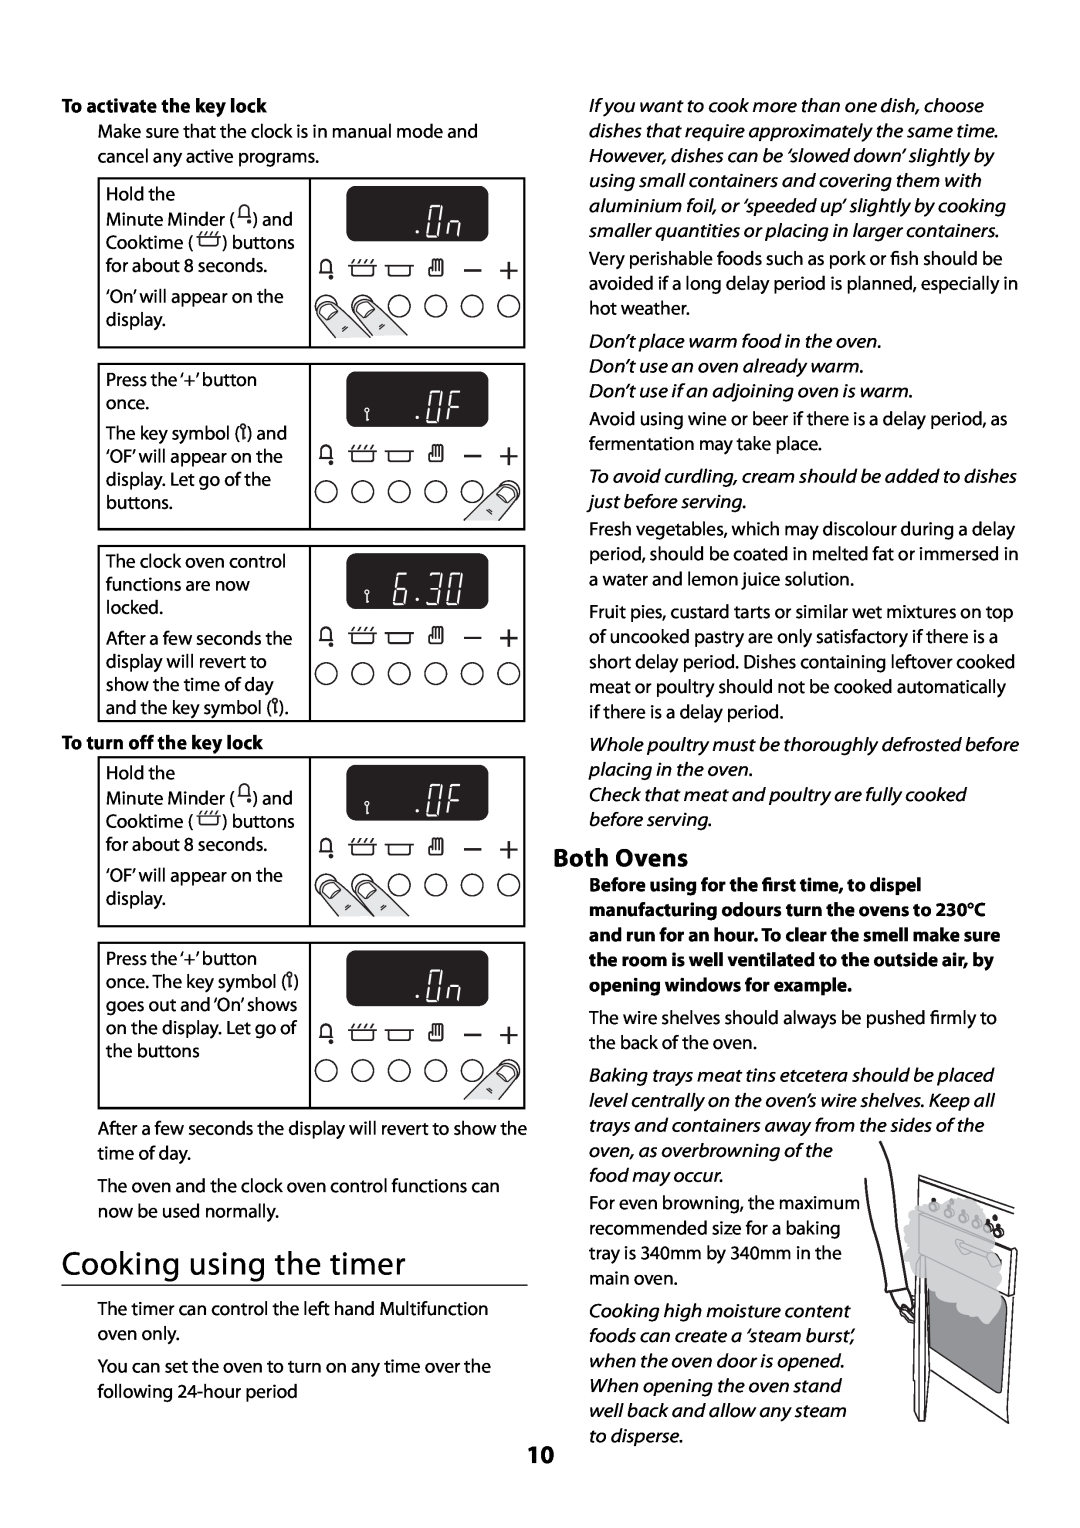 Rangemaster U109300 - 01 manual Cooking using the timer, Both Ovens, To activate the key lock, To turn off the key lock 